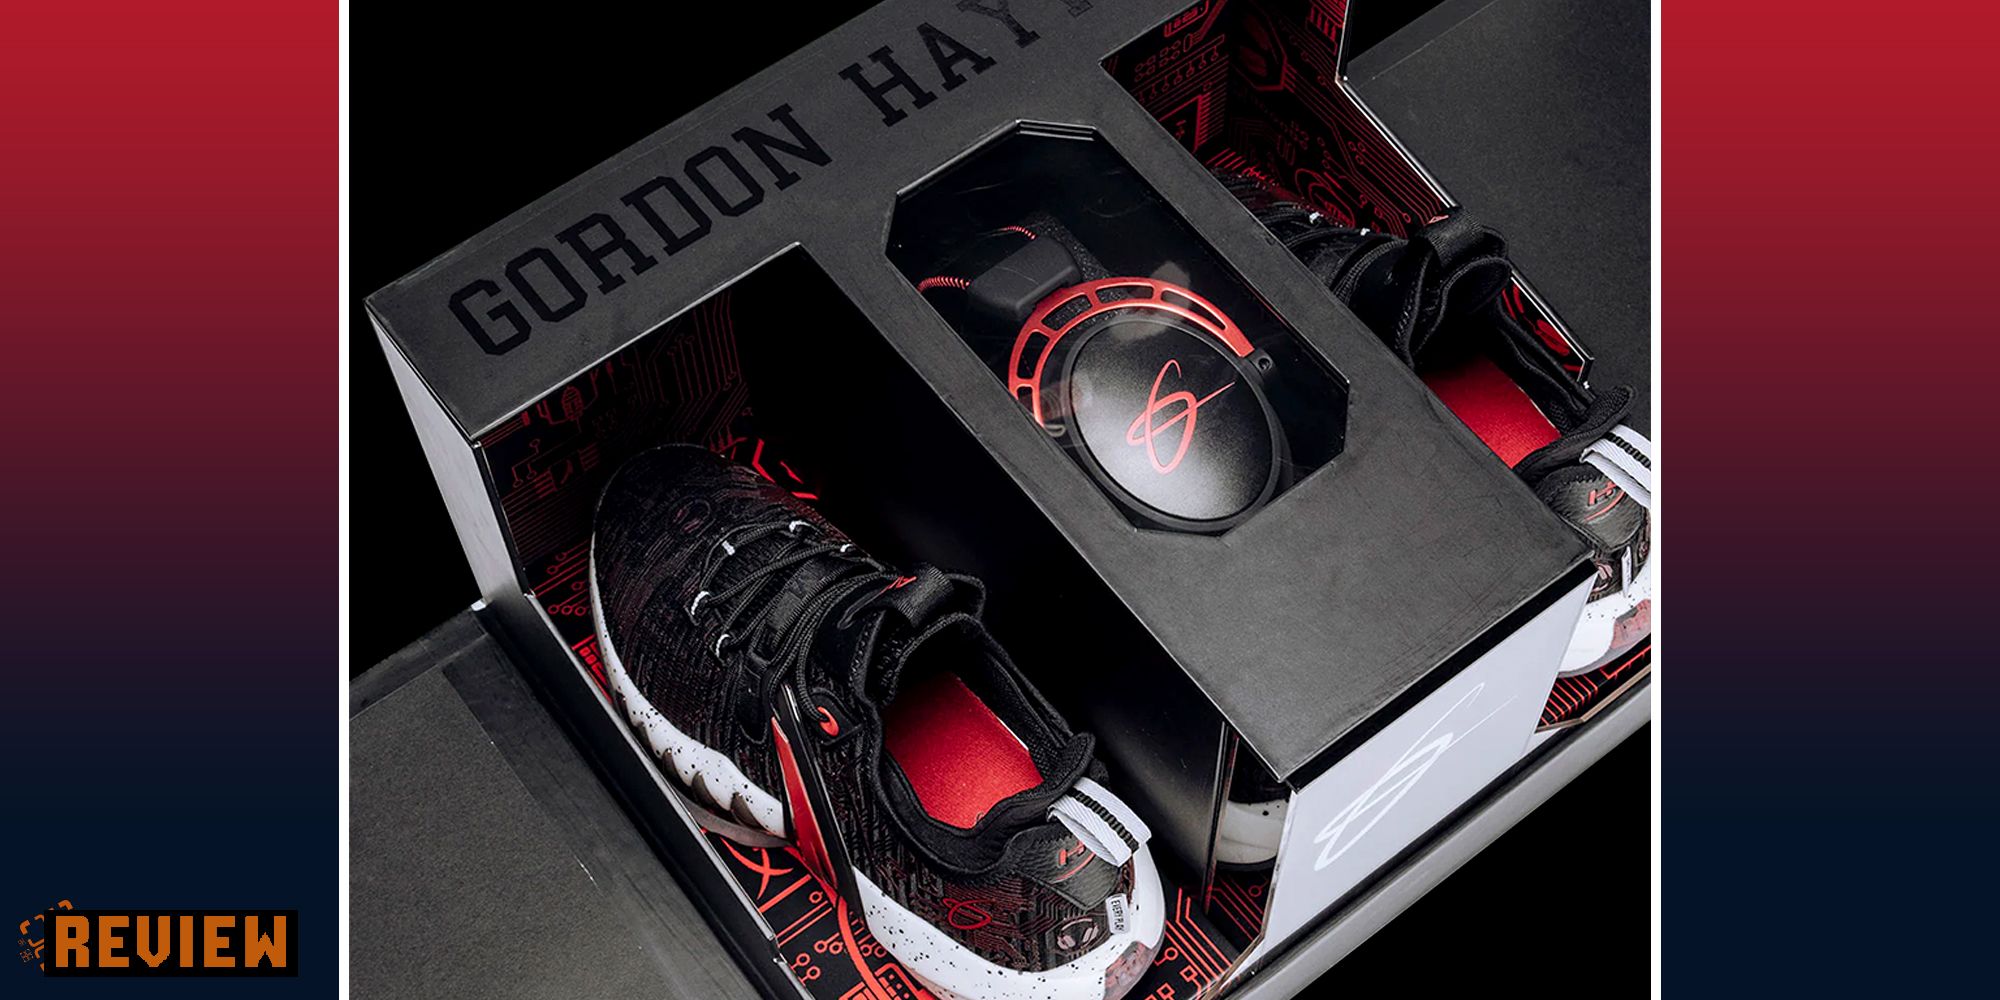 HyperX And Anta Gordon Hayward Limited Edition Sneakers And Gaming Headset Bundle.